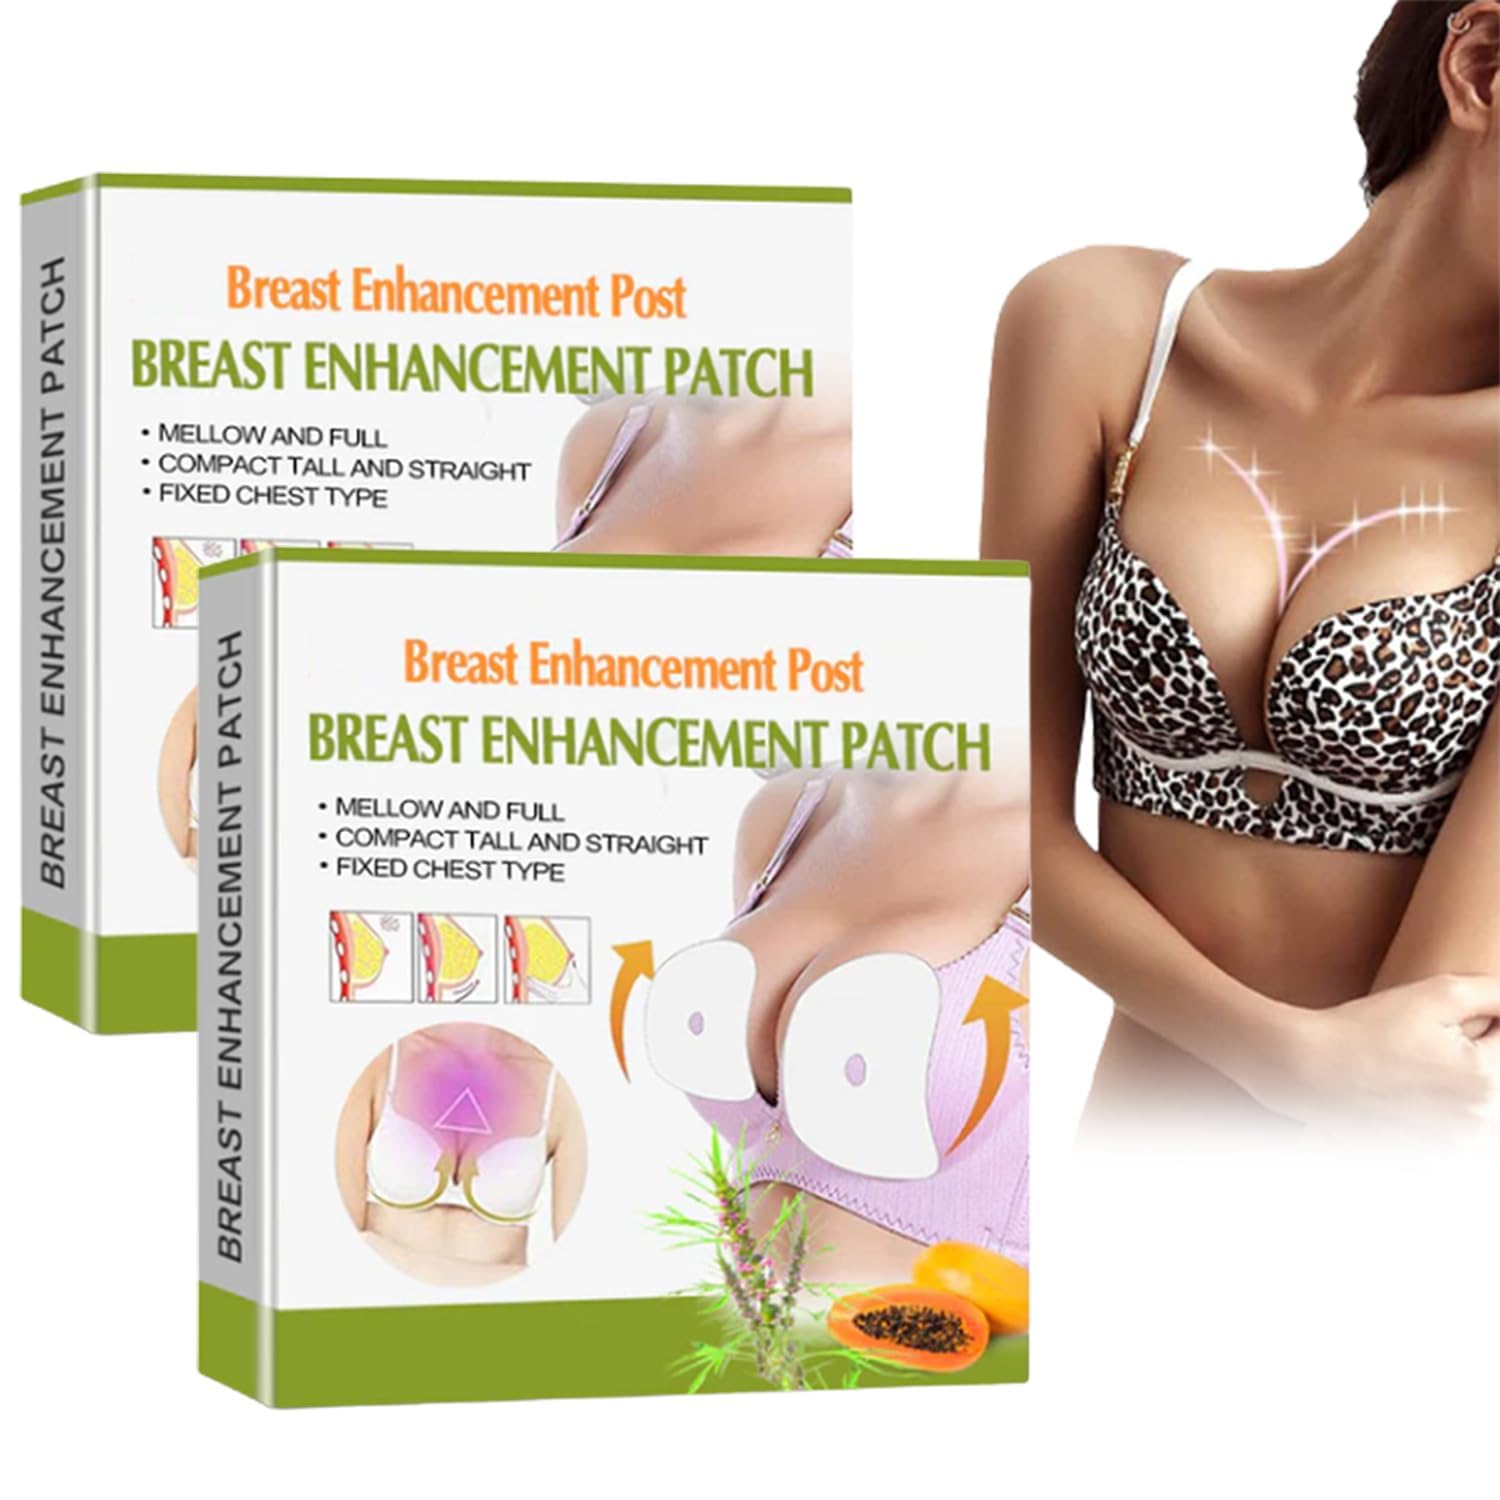 Ginger Bust Enhancement Patch, Ginger Breast Enlargement Patch